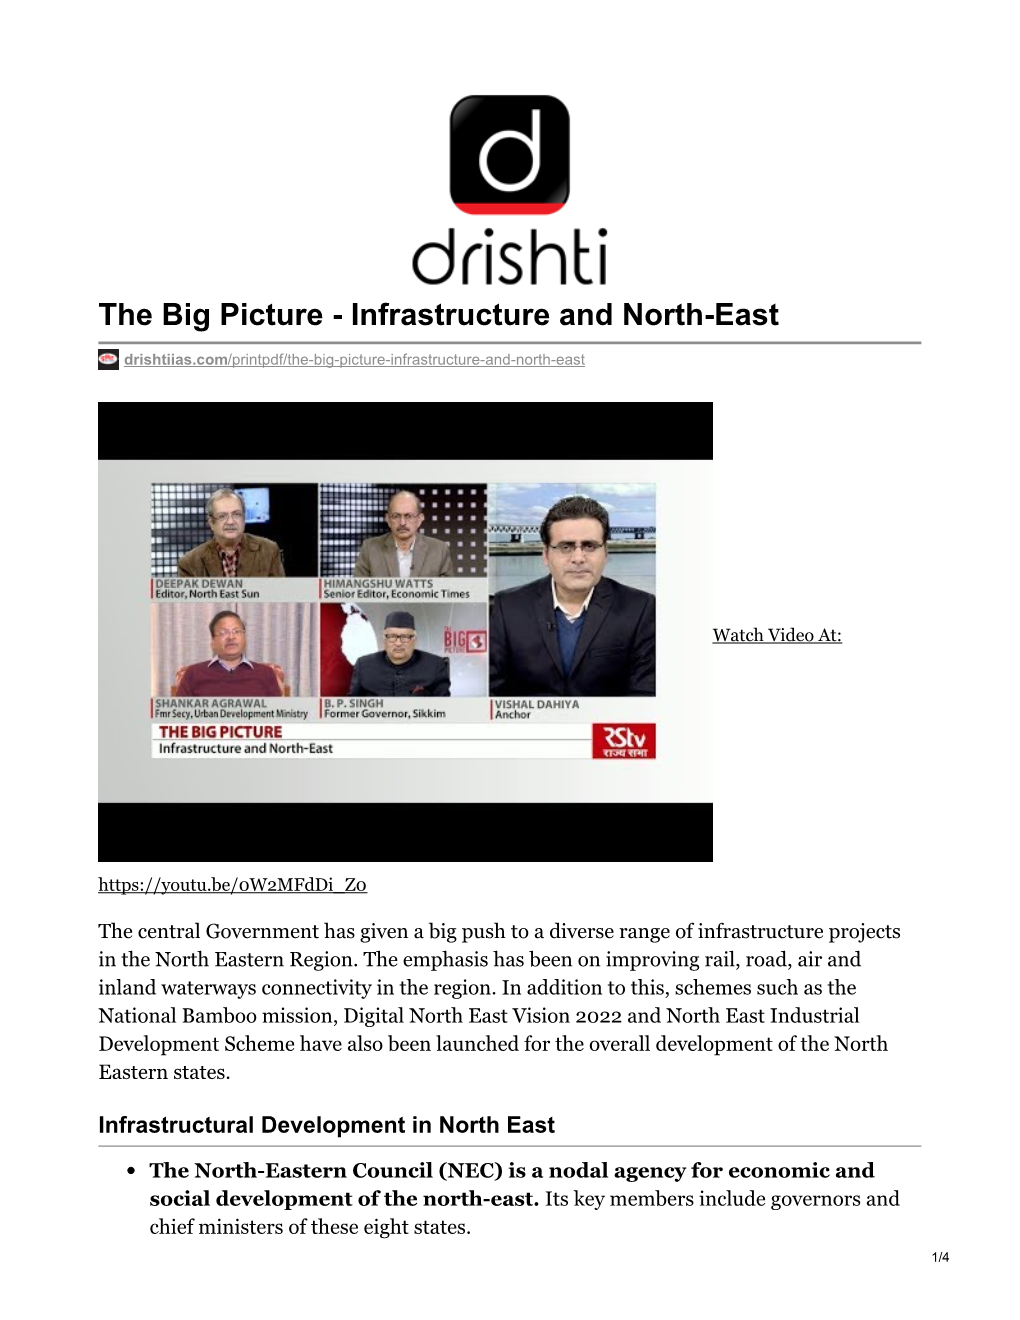 Infrastructure and North-East